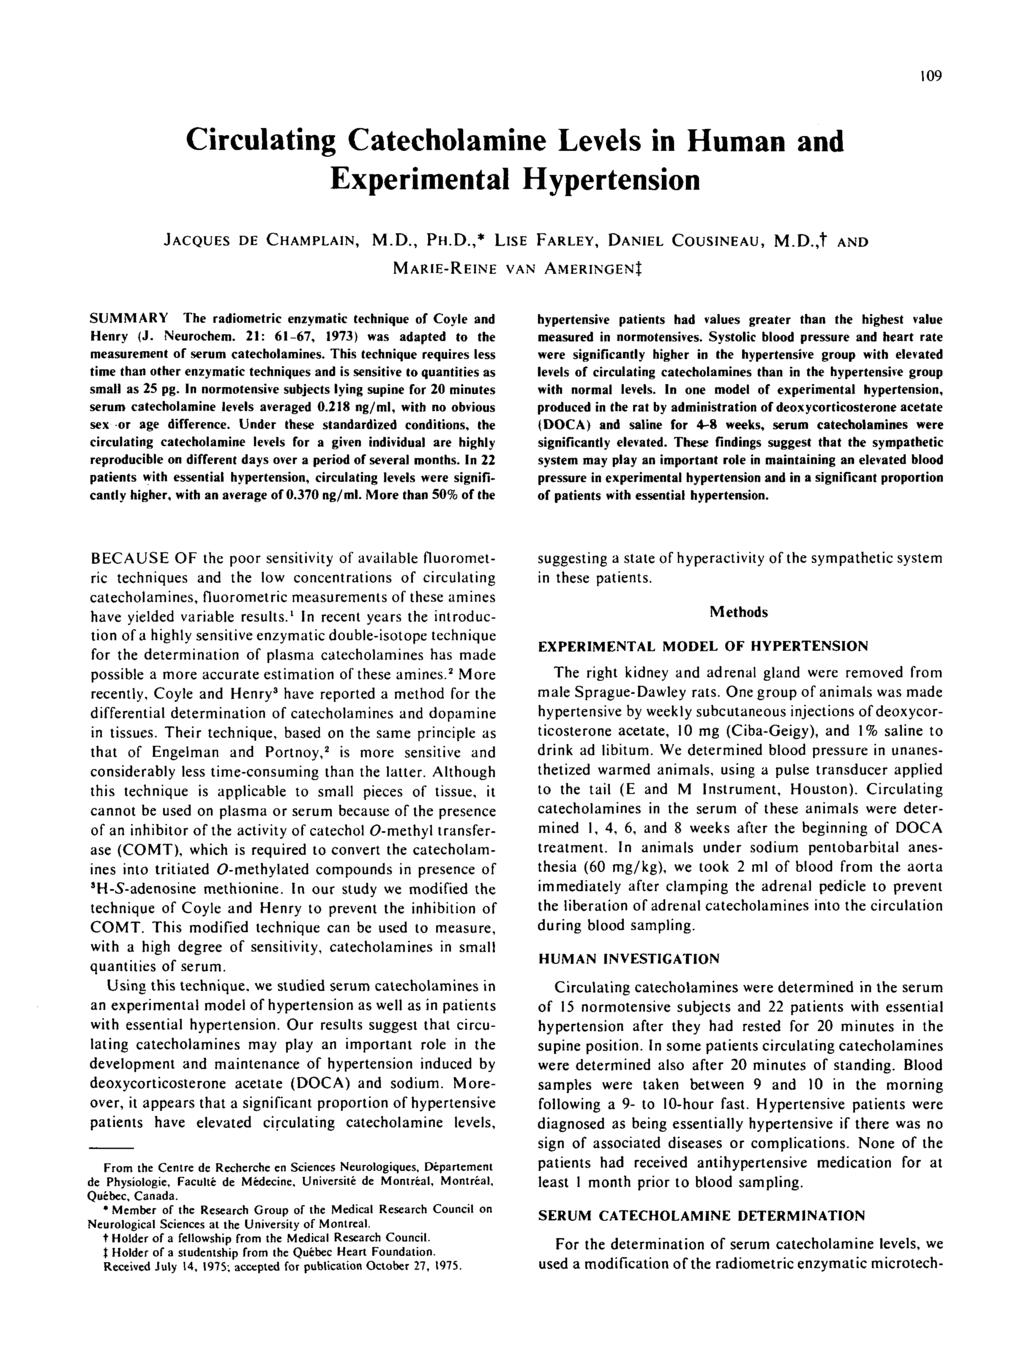 109 Circulating Catecholamine Levels in Human and Experimental Hypertension JACQUES DE CHAMPLAIN, M.D., PH.D.,* LISE FARLEY, DANIEL COUSINEAU, M.D.,t AND MARIE-REINE VAN AMERINGENJ SUMMARY The radiometric enzymatic technique of Coyle and Henry (J.